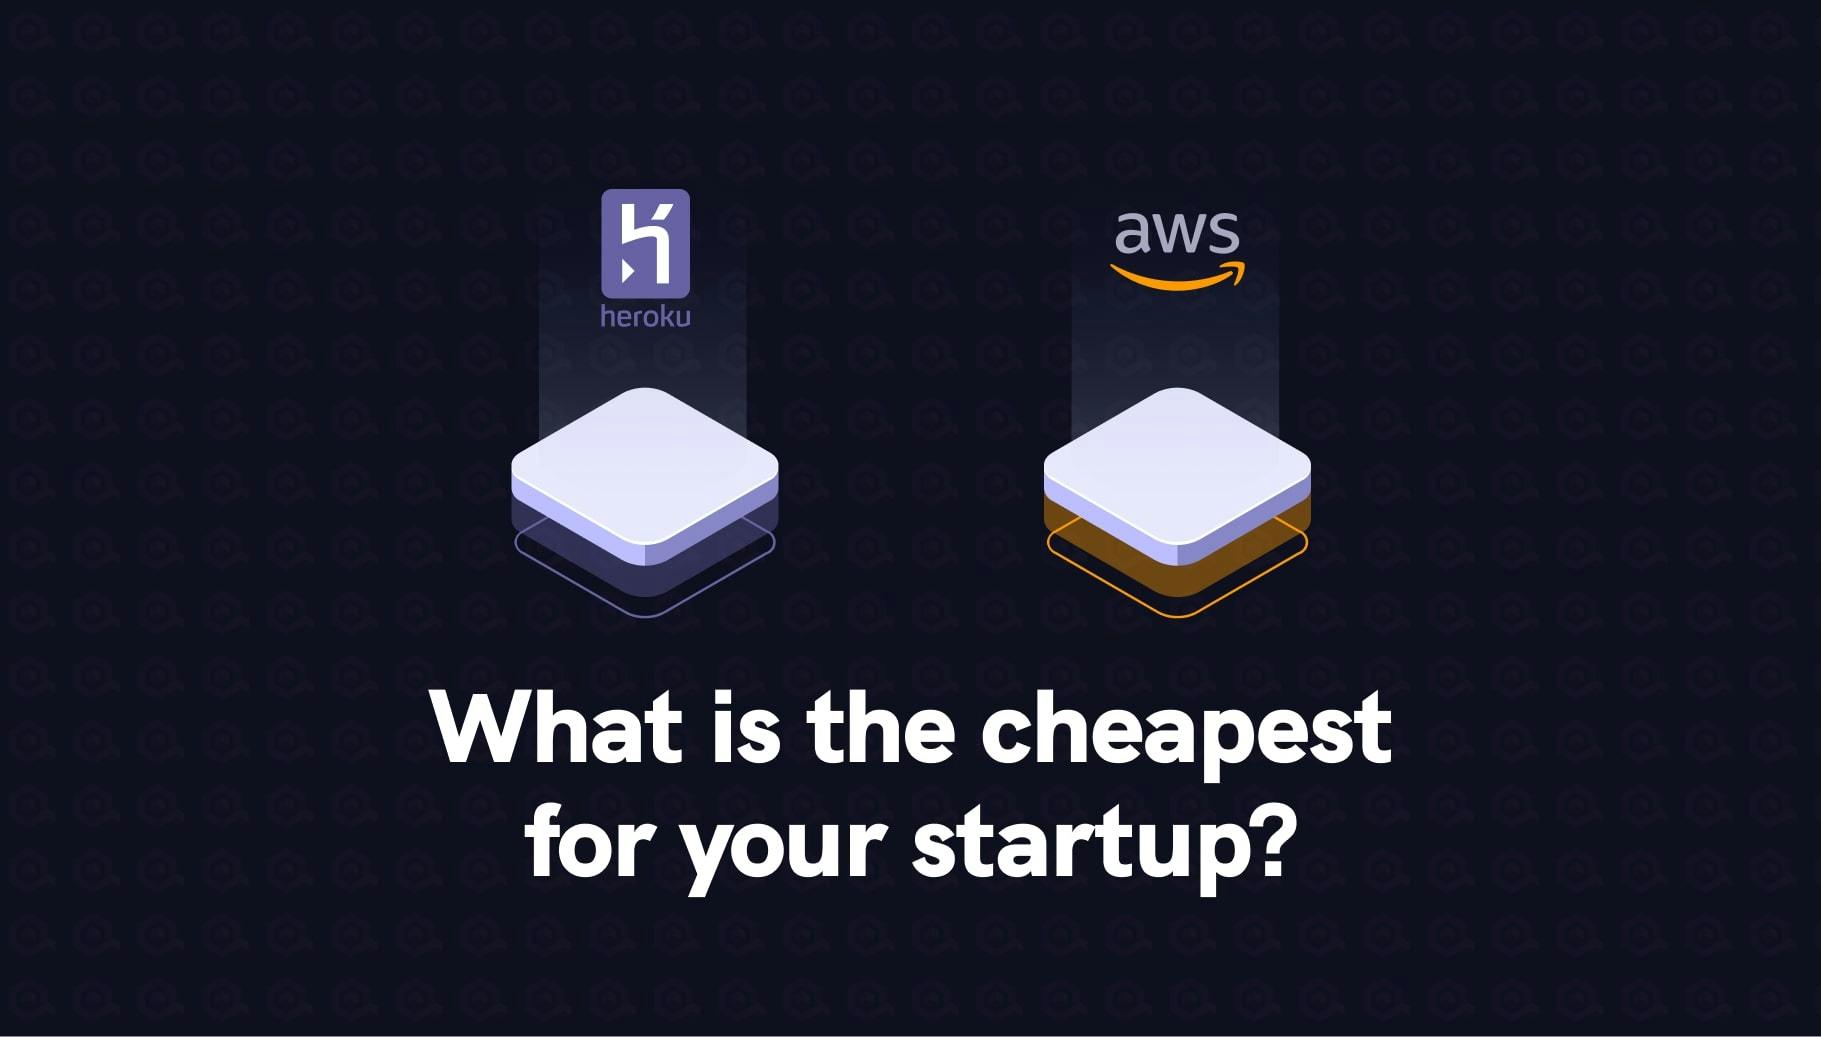 Heroku vs AWS: What is the cheapest for your startup in 2023? - Qovery